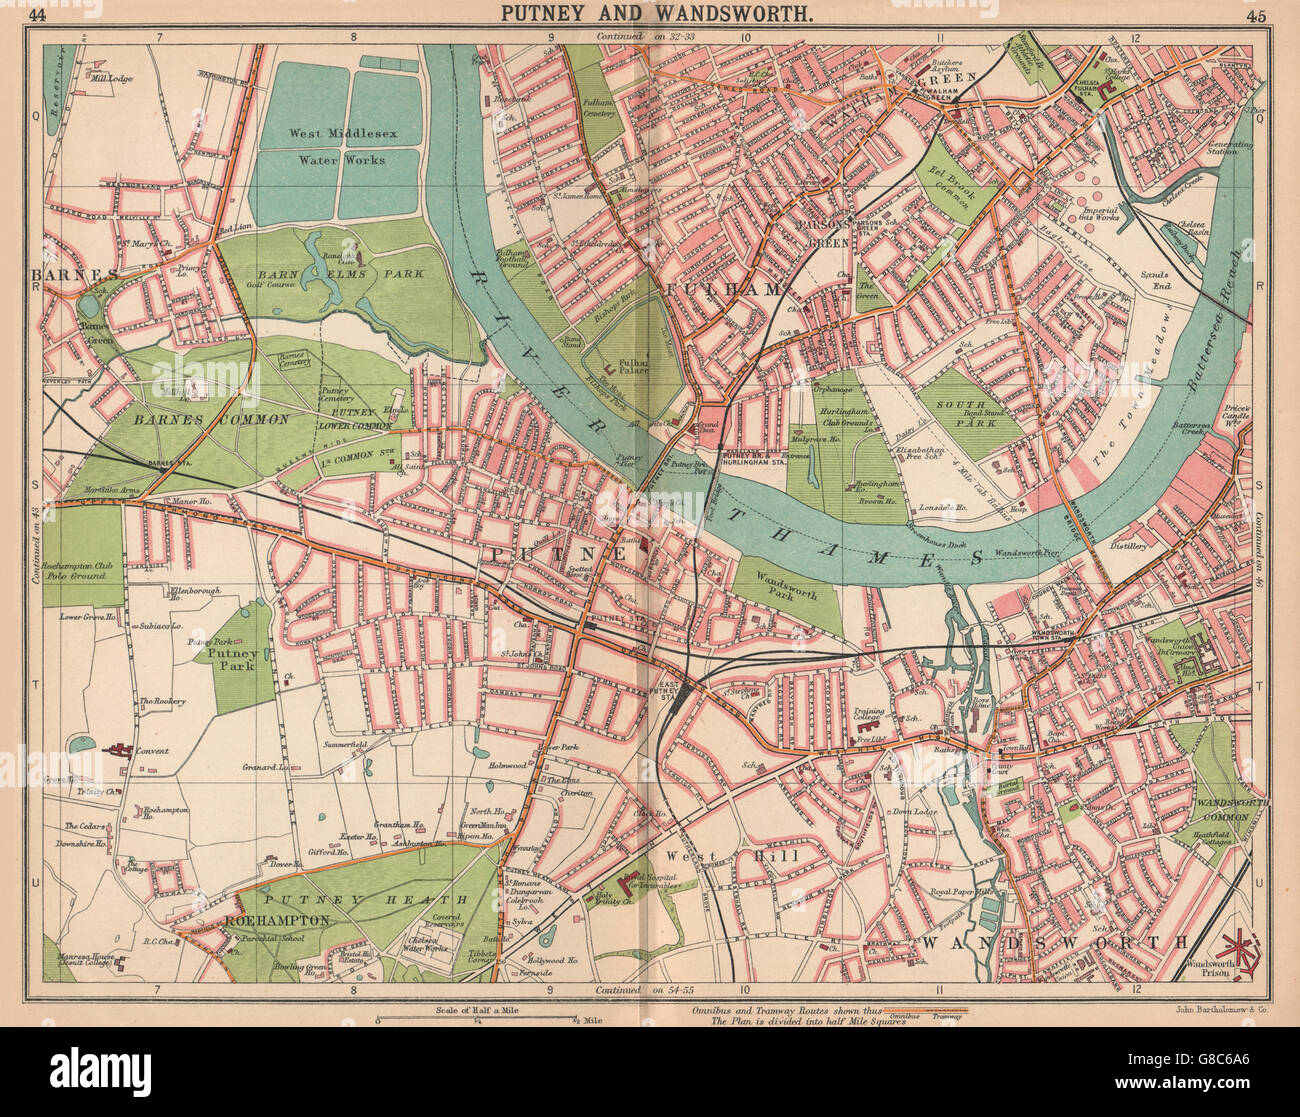 LONDON SW: Putney Wandsworth Fulham Barnes Parson's Green. Tram routes, 1913 map Stock Photo